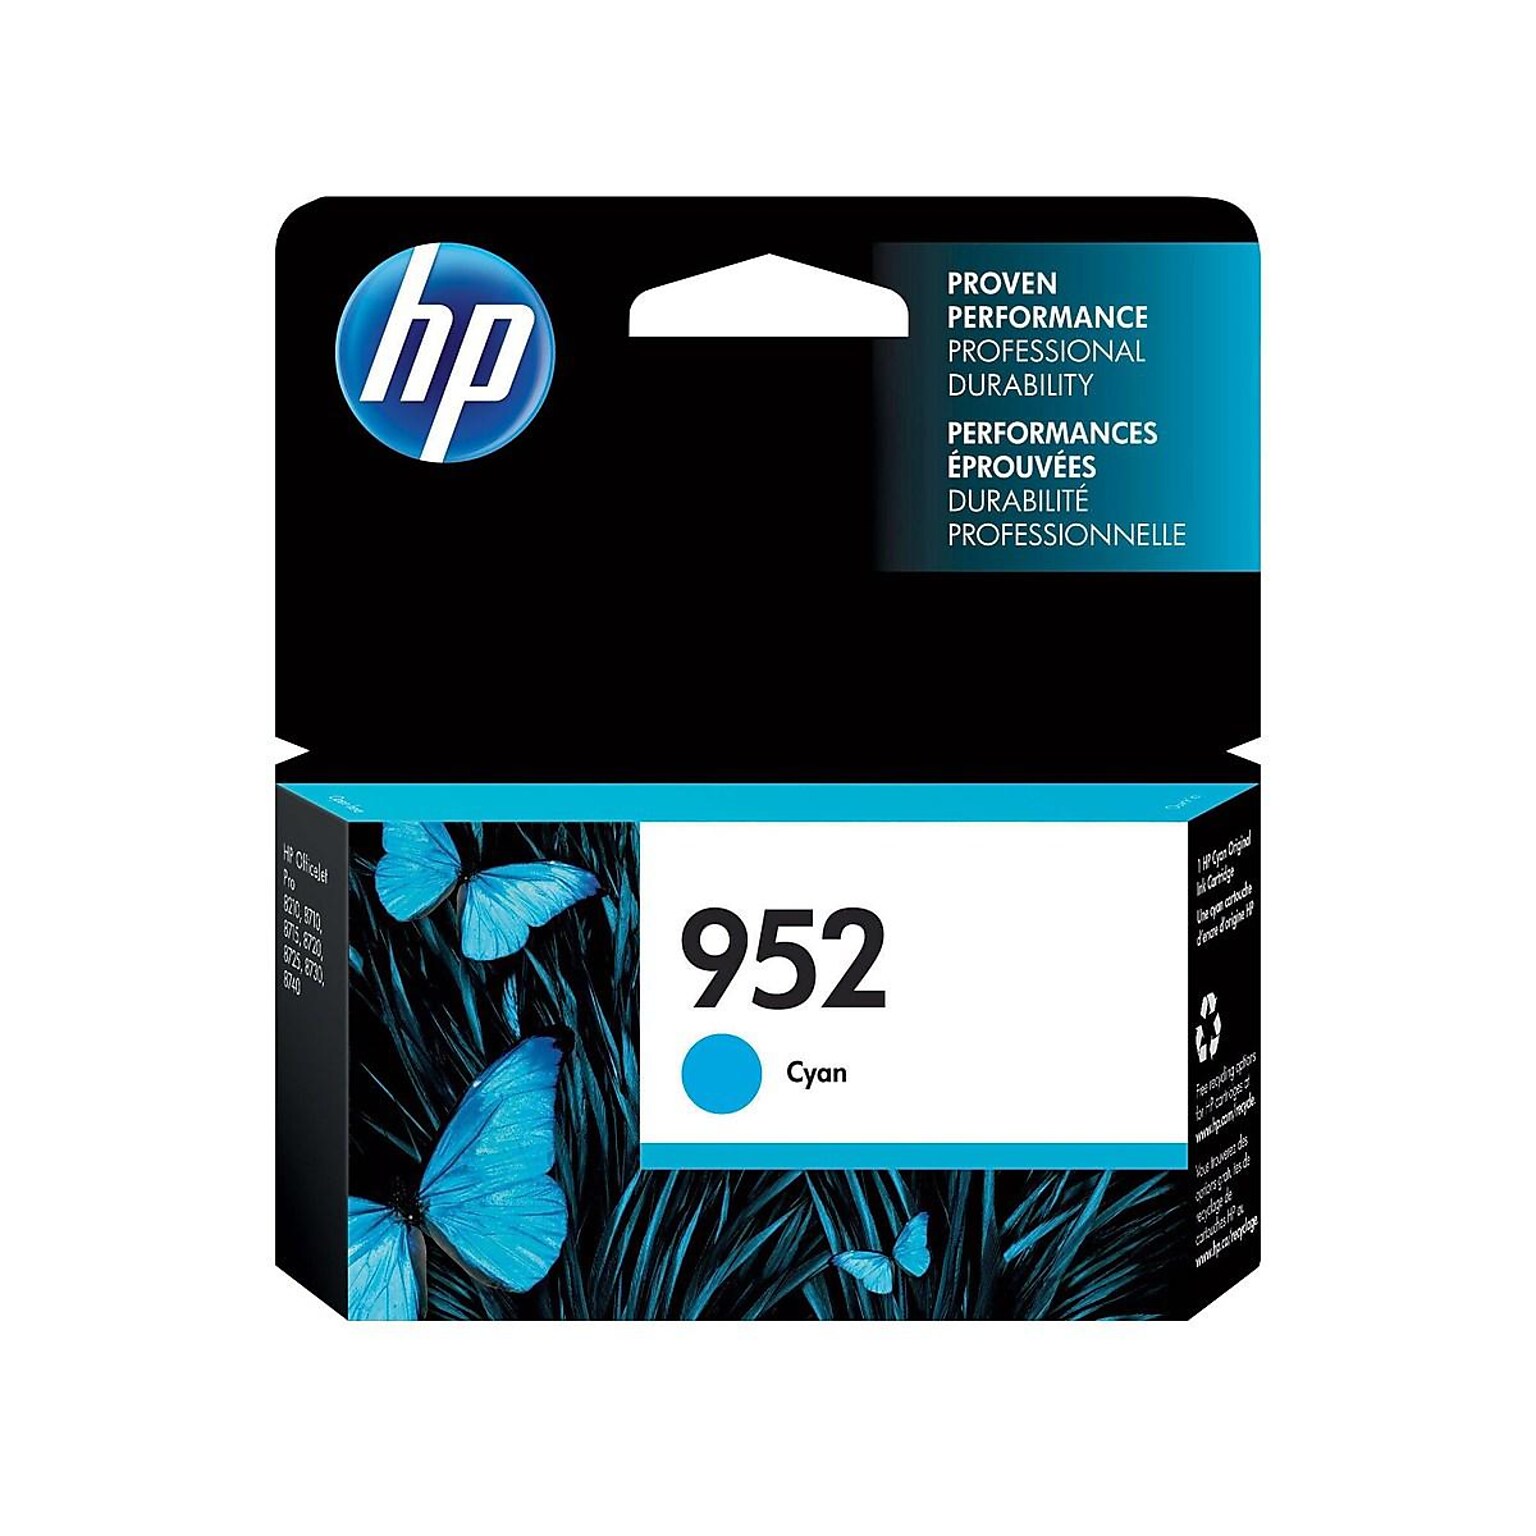 HP 952 Cyan Standard Yield Ink Cartridge, Print Up to 630 Pages (L0S49AN#140)